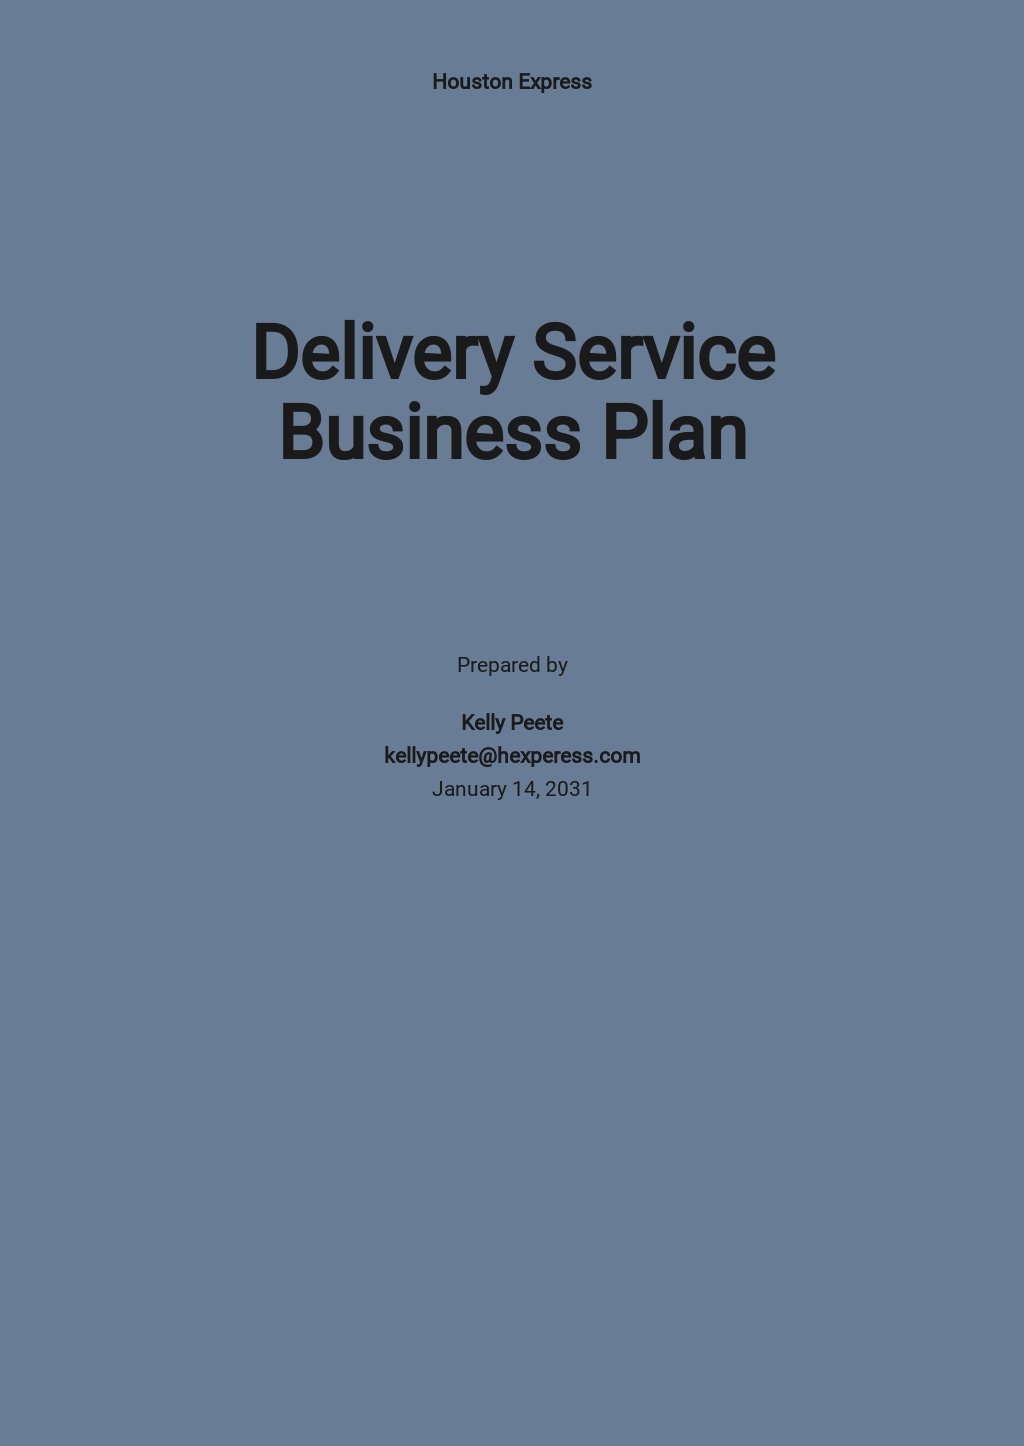 business plan template for delivery service